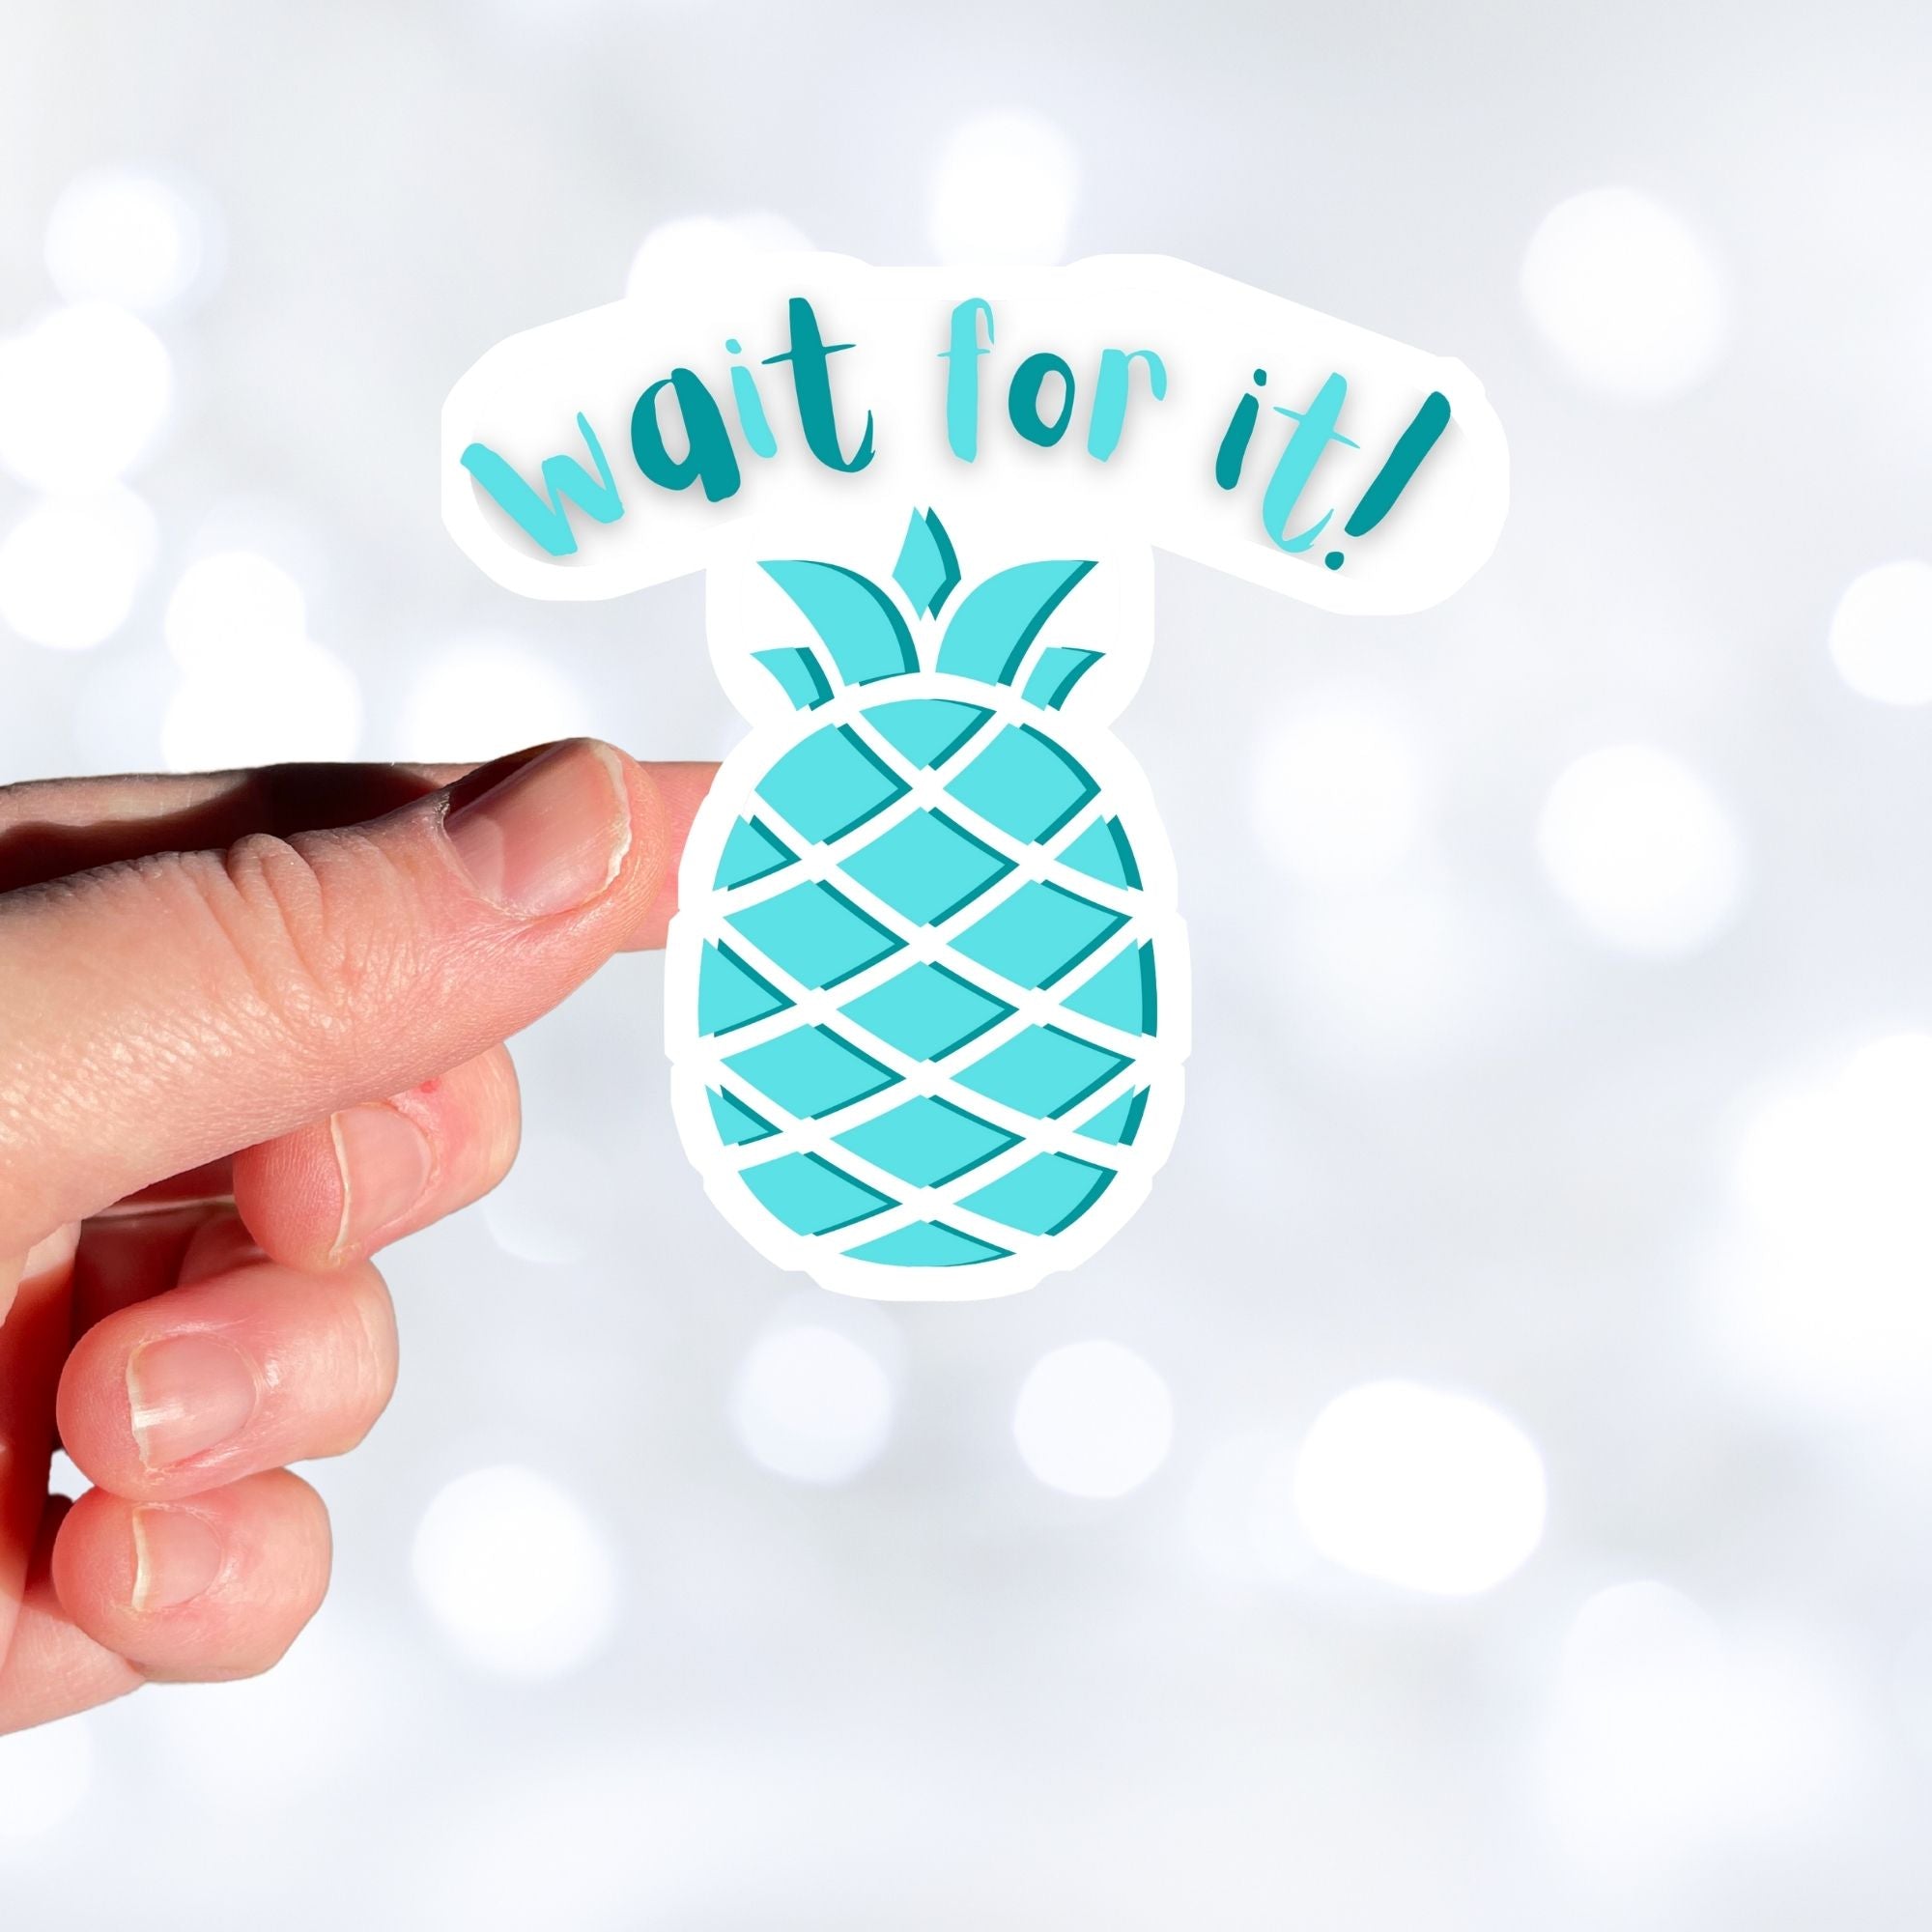 Don't get psyched out by this individual die-cut sticker! It features a teal blue pineapple with the words "Wait for it!" above. This image shows a hand holding the Wait for it! sticker.